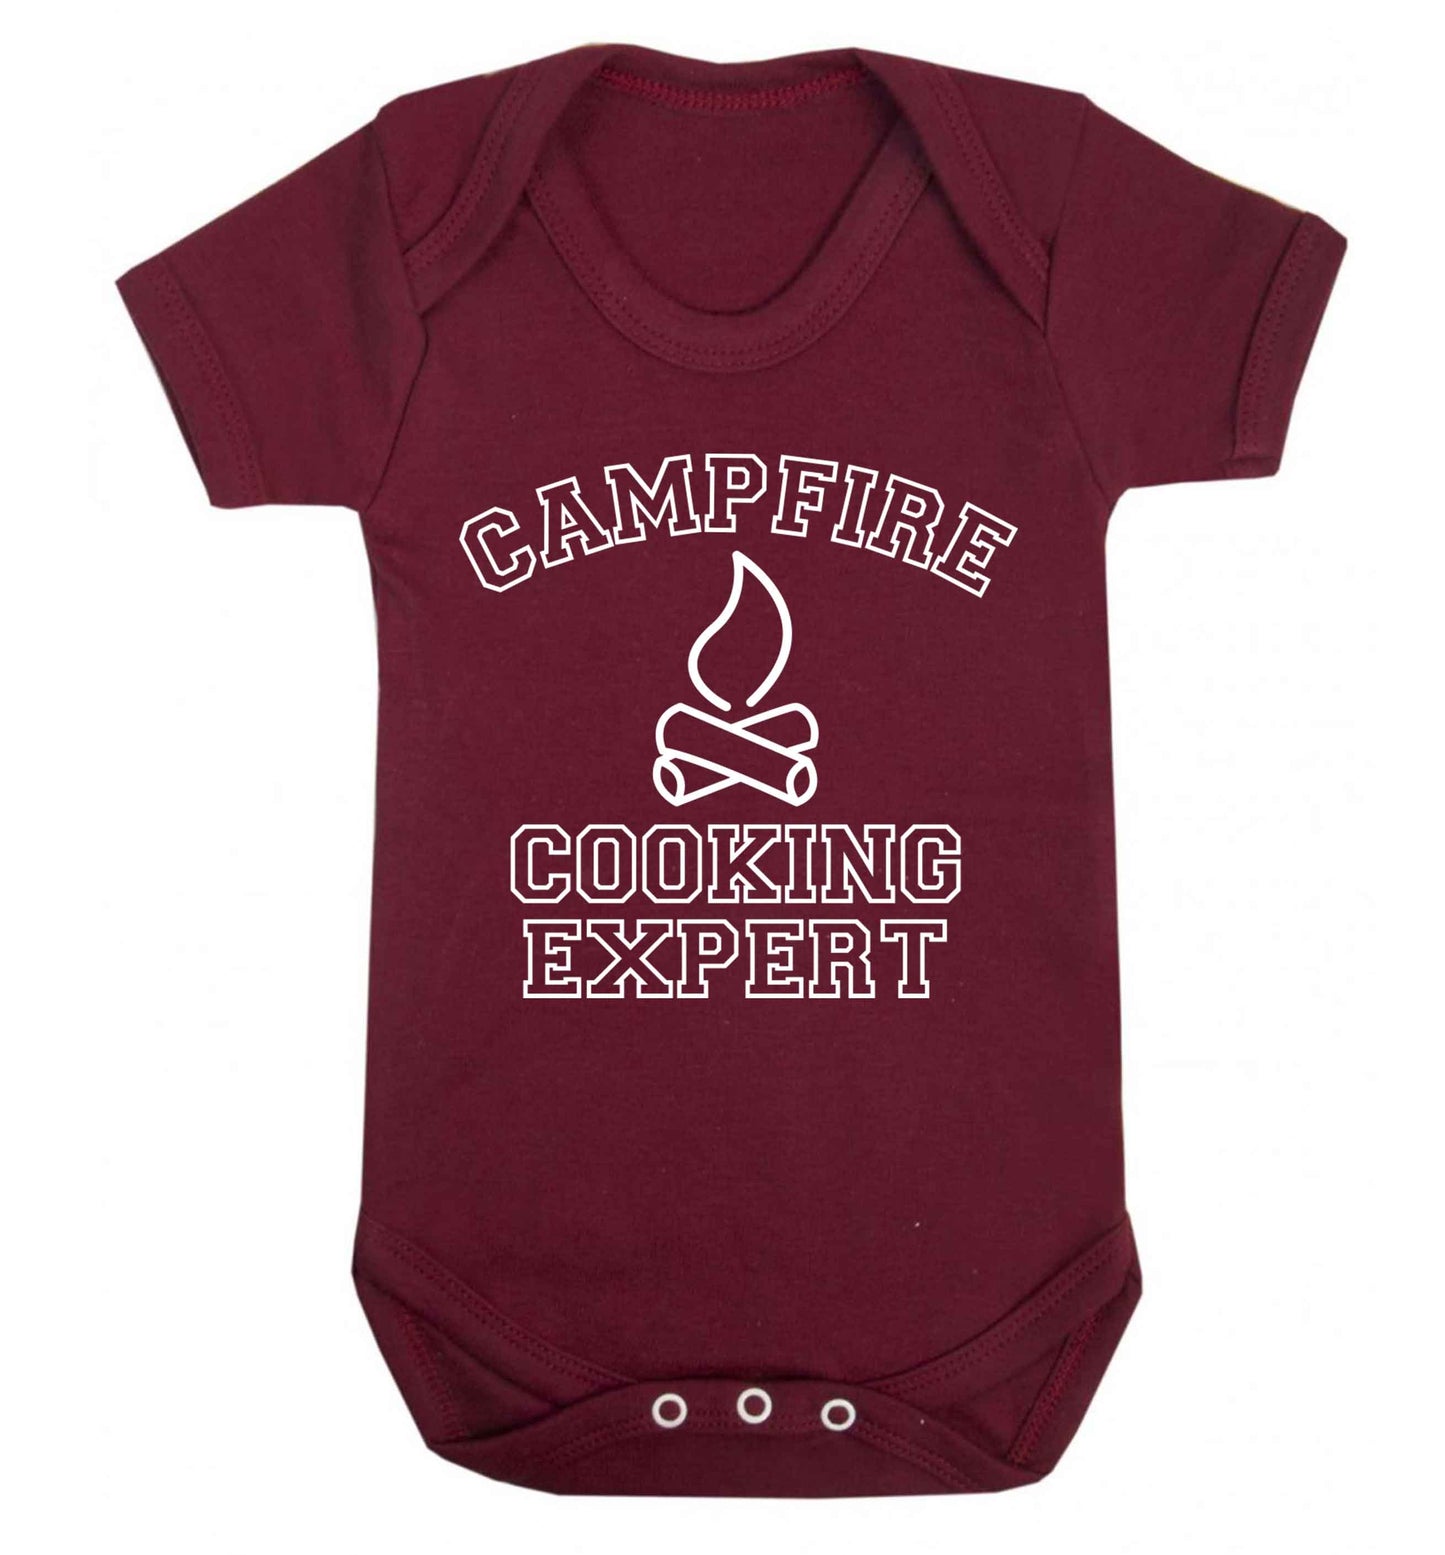 Campfire cooking expert Baby Vest maroon 18-24 months